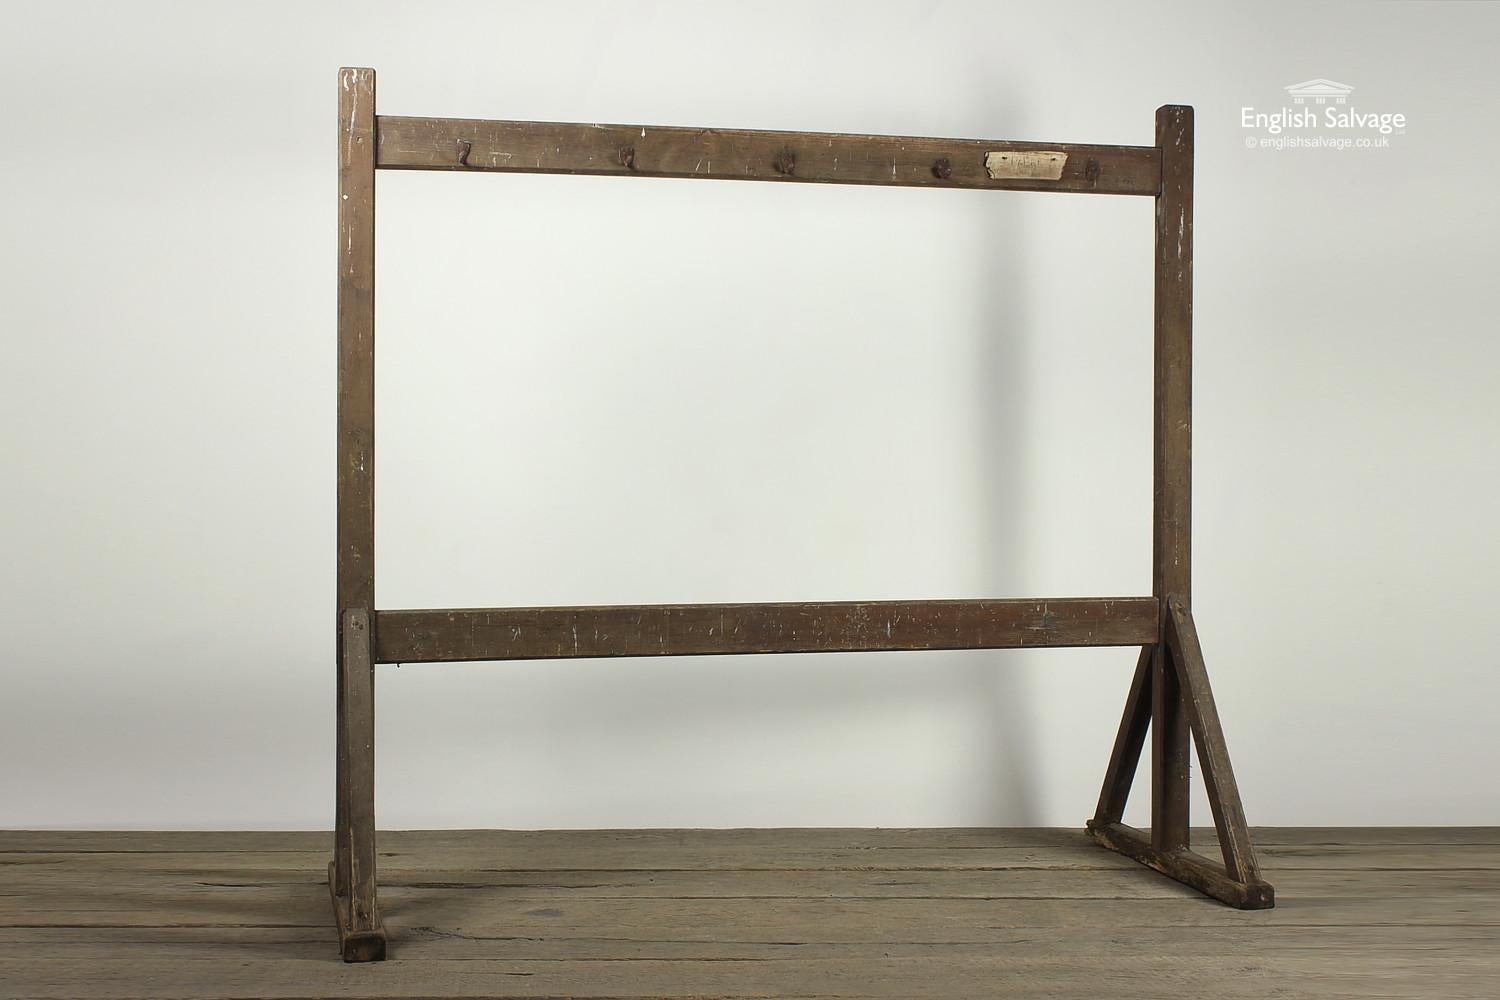 Vintage simple wooden coat stand on trestle like or gallow style legs and hooks either side. An ideal addition to any entrance hallway, big enough for the whole family to use, hooks could also be added to the bottom bar.

Slight wobble on base!